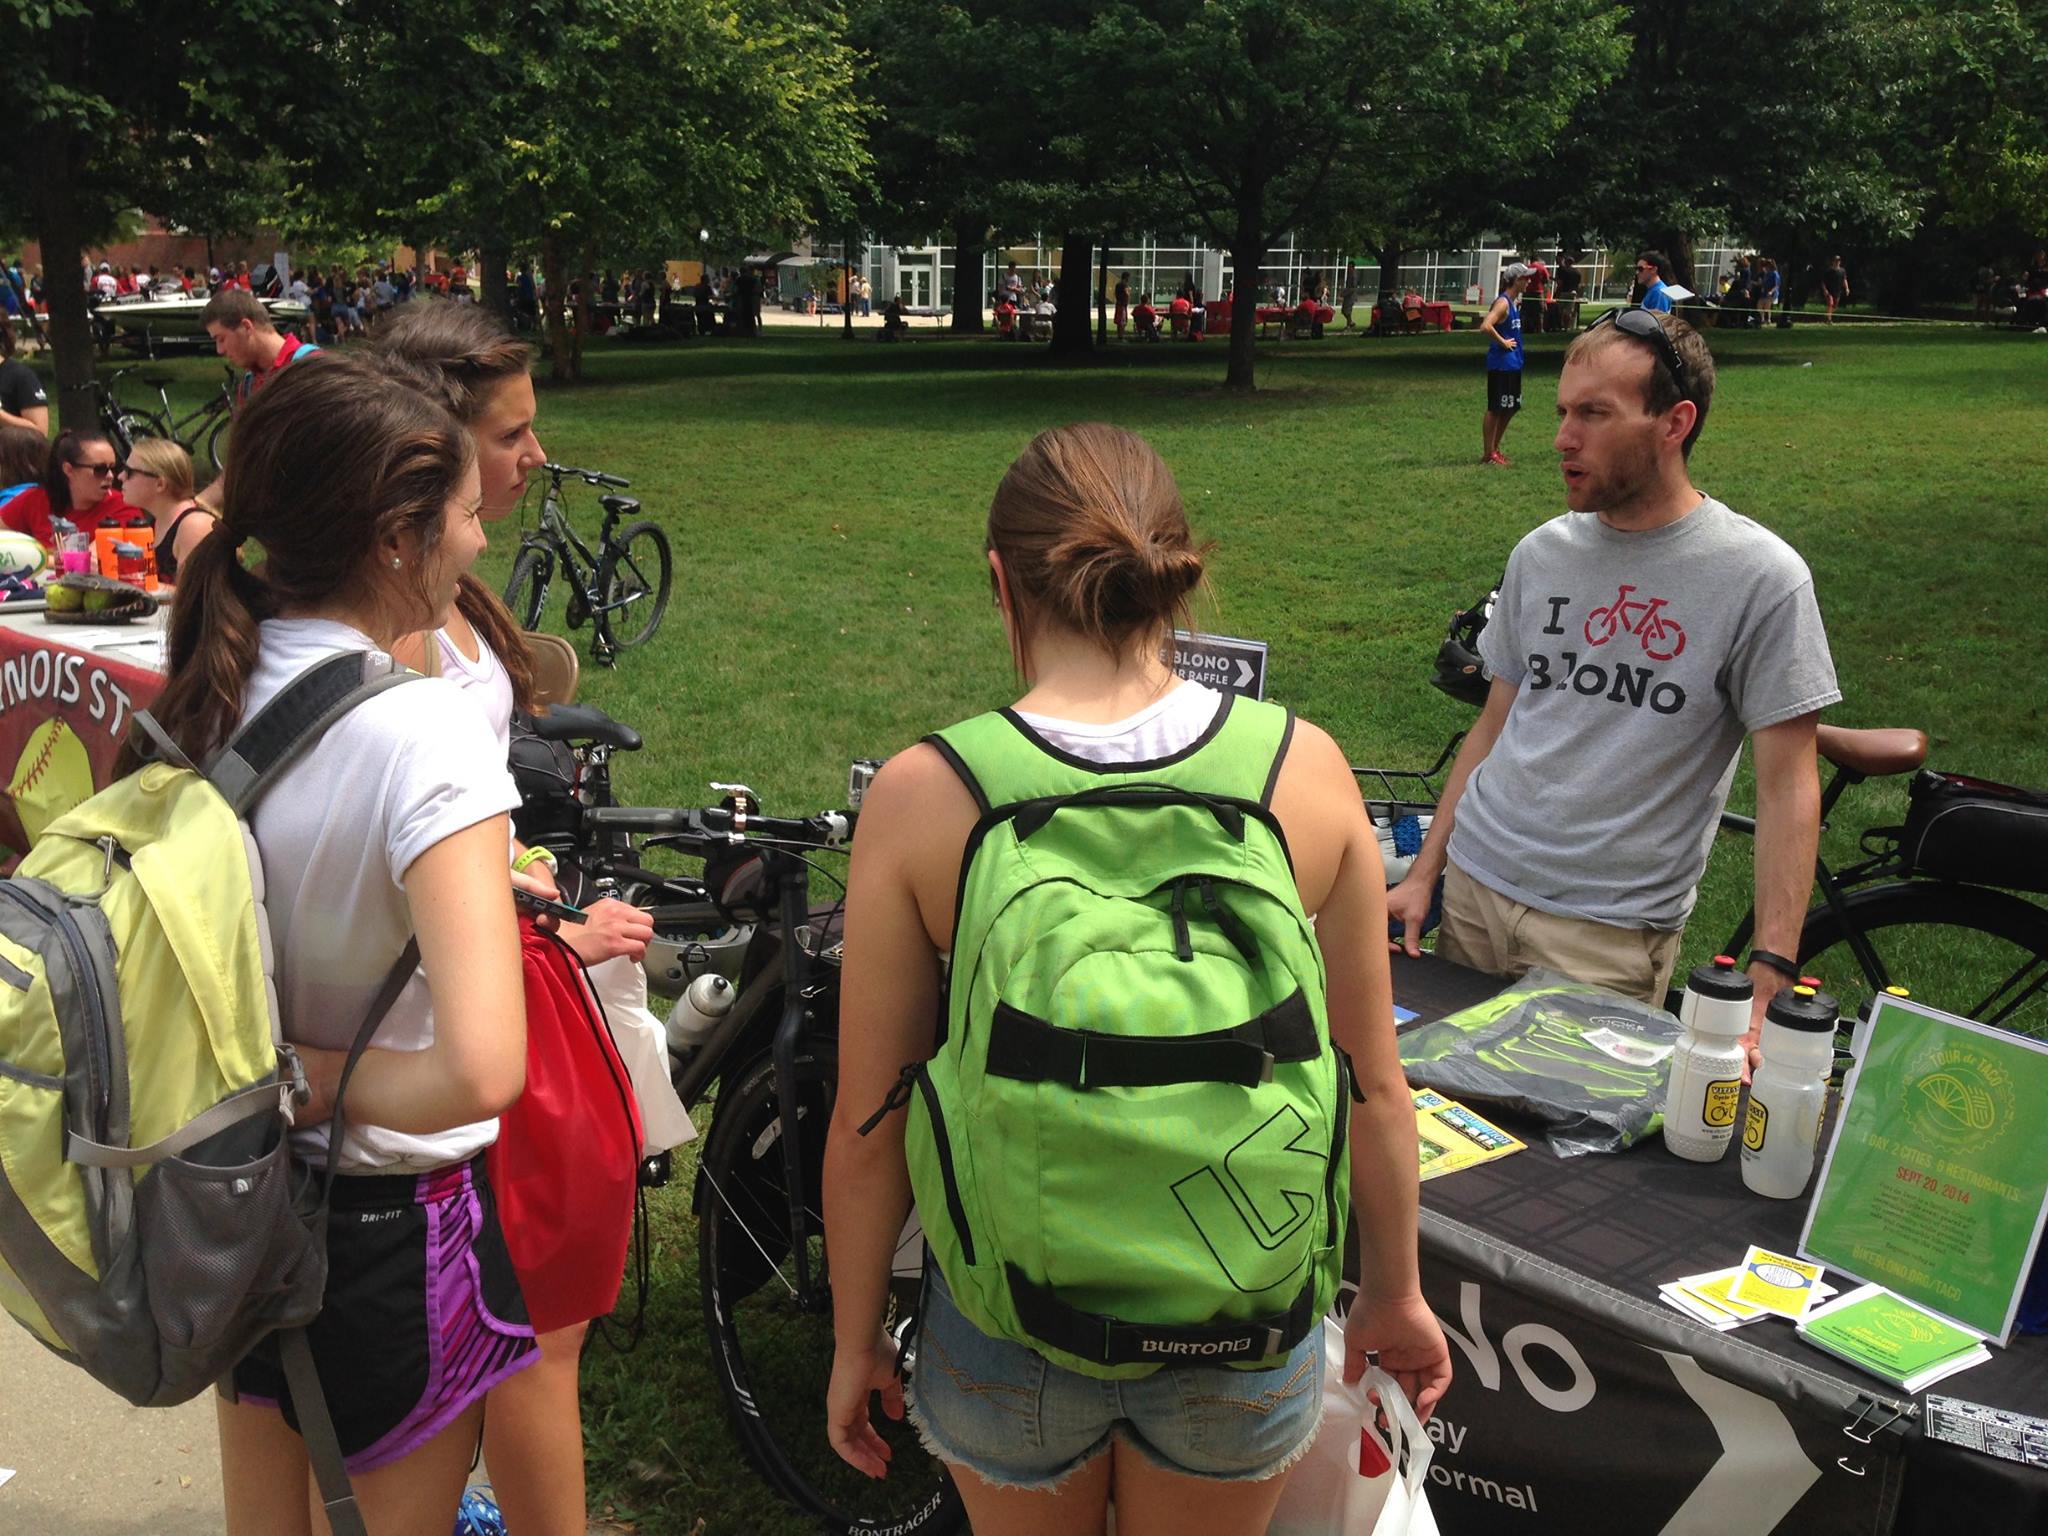 I'm talking about bike safety with ISU students.